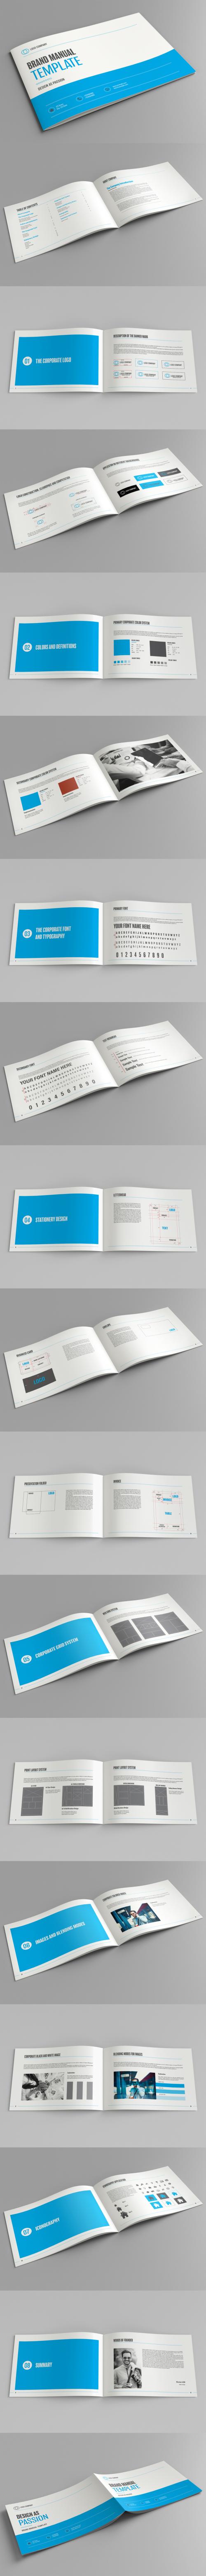 Brand Manual Layout with Blue Accents - 185282615